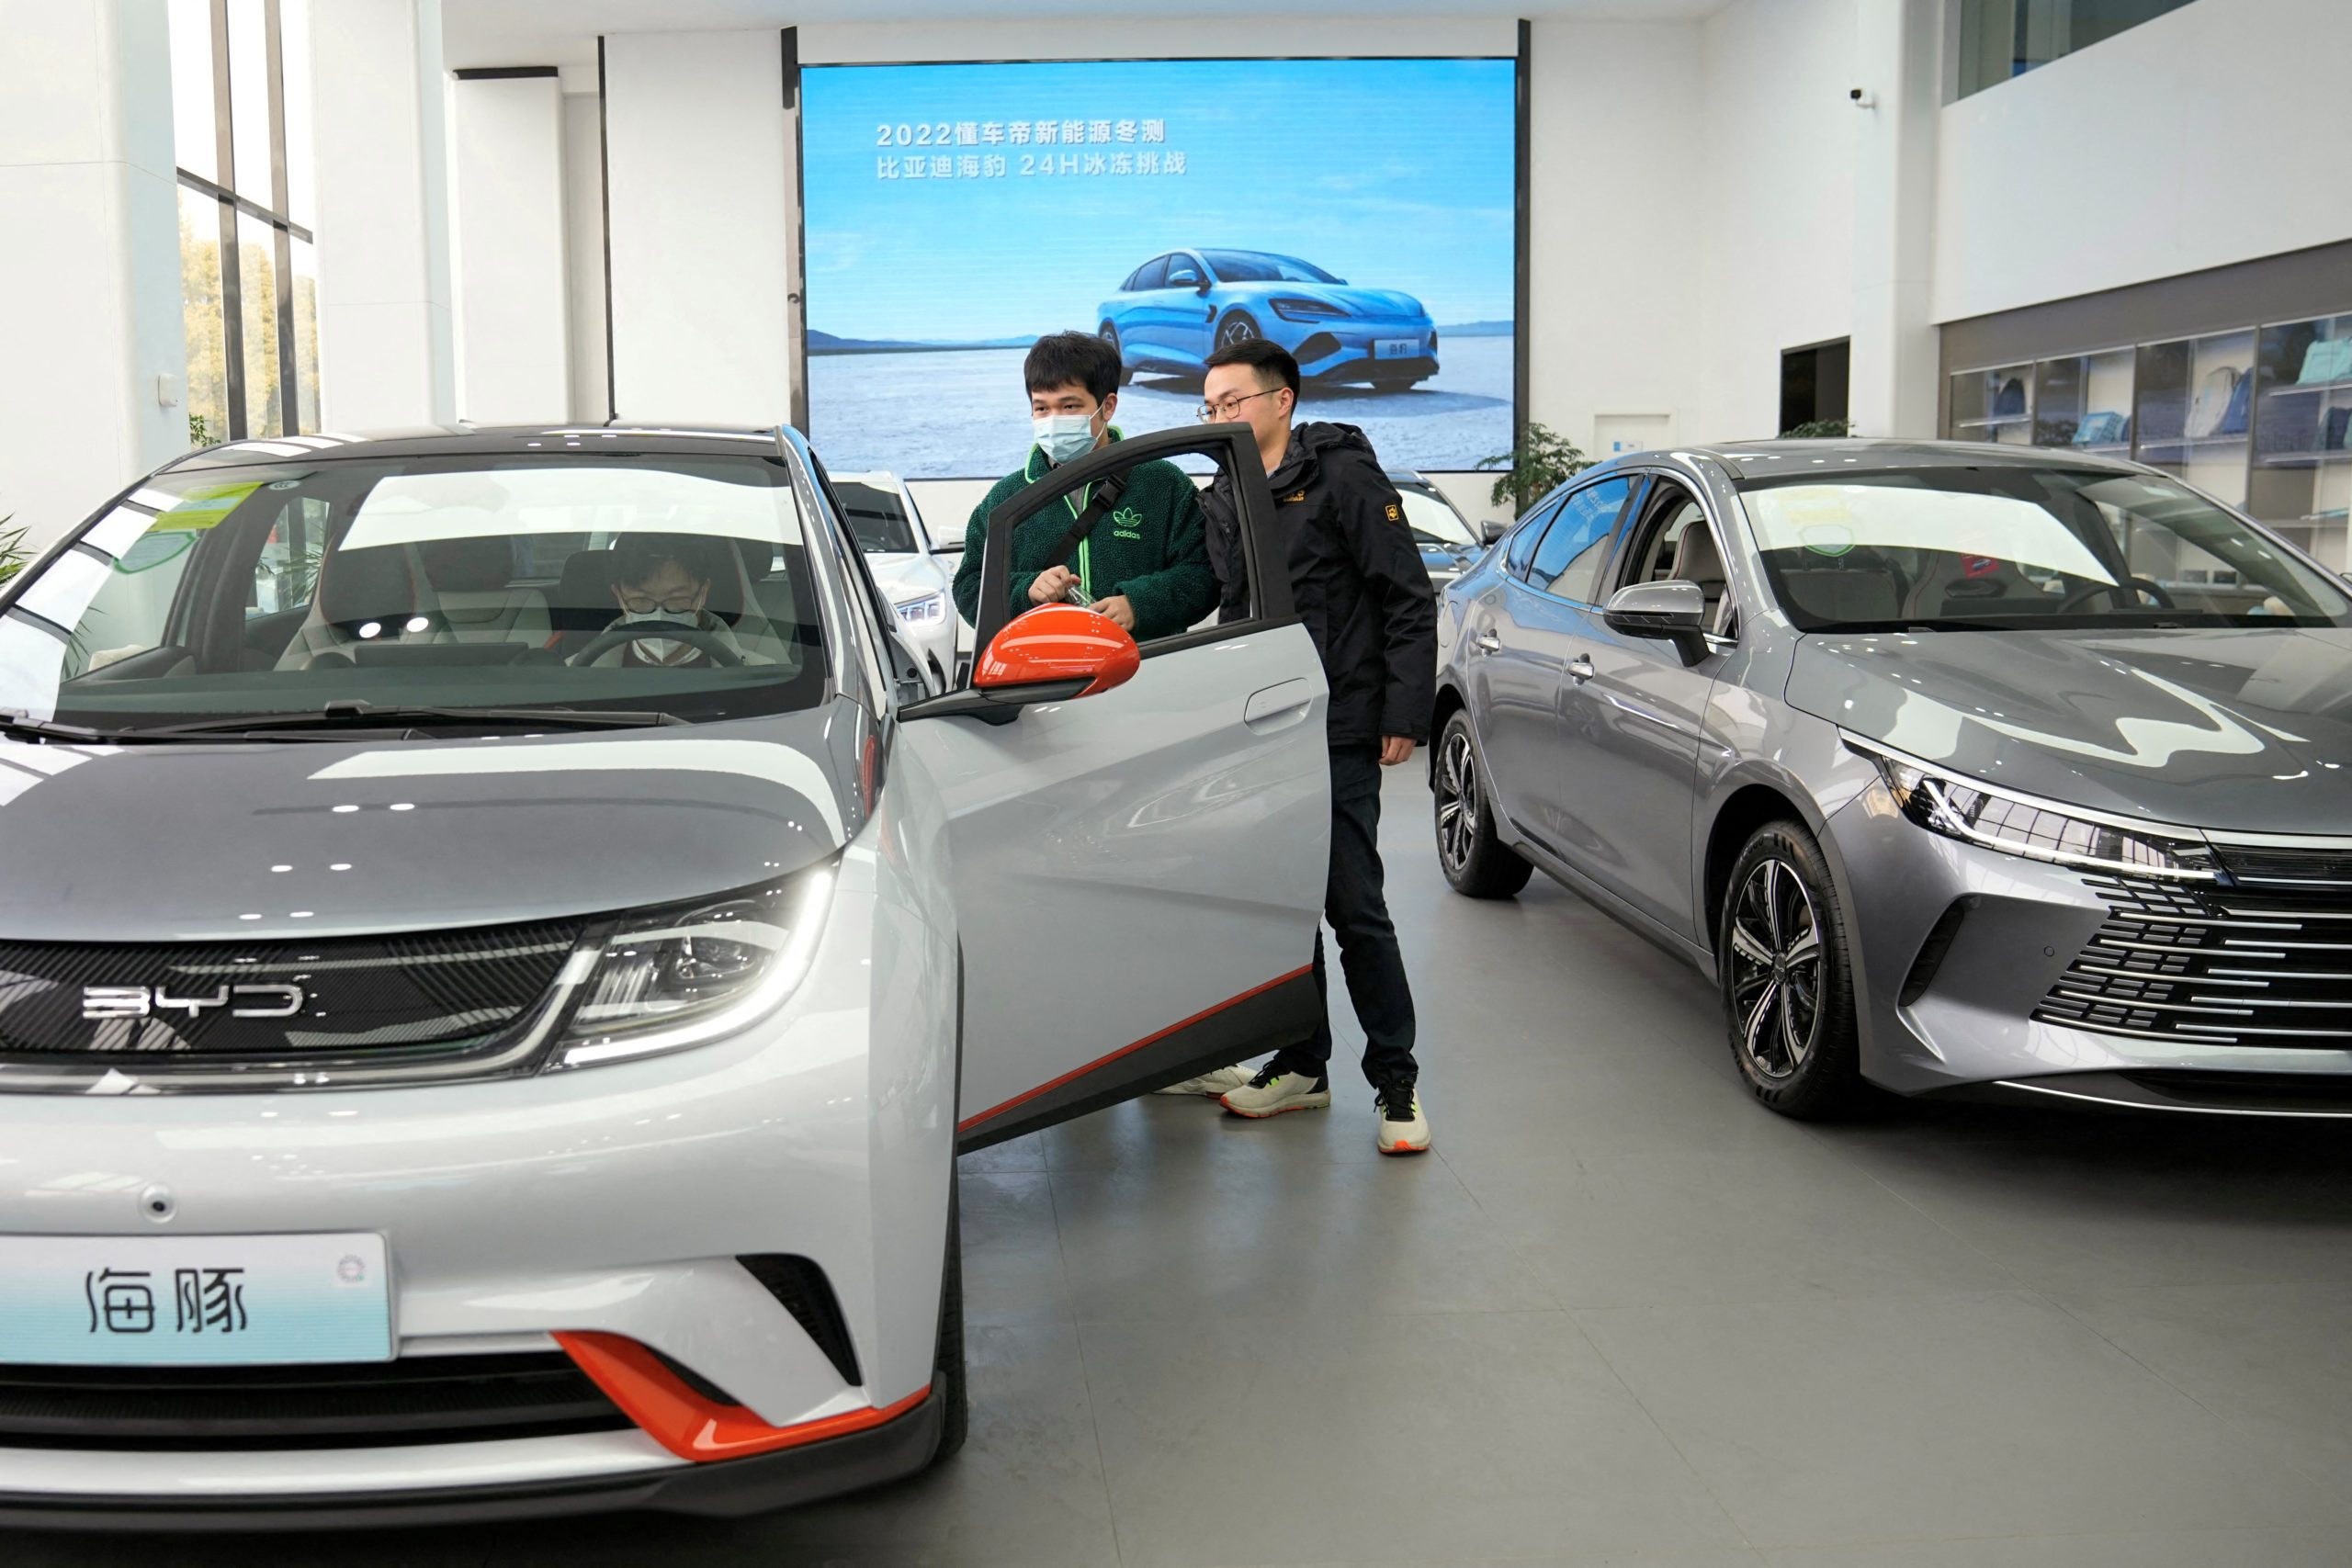 Chinese automakers sold 75% of EVs in Southeast Asia in Q1: Report